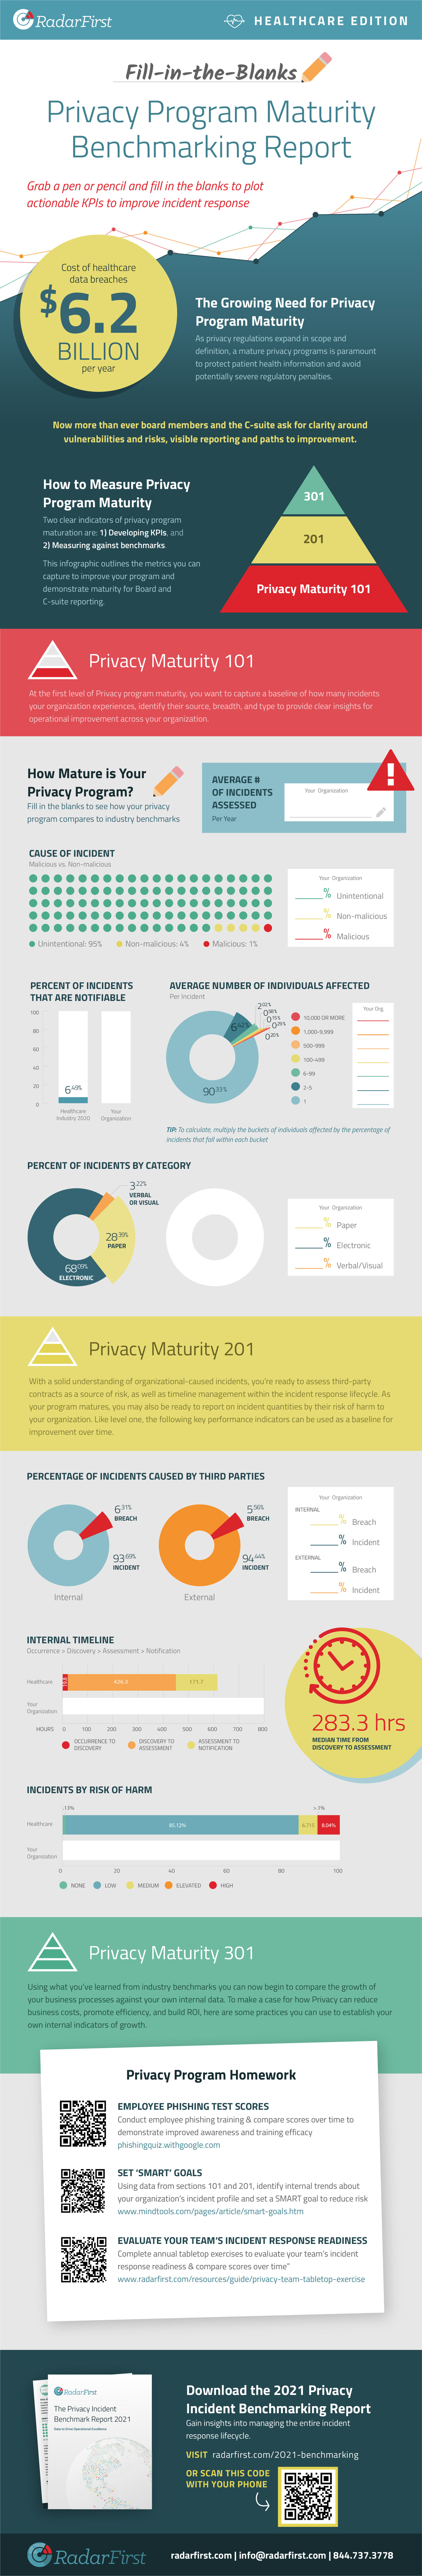 2021 Privacy incident benchmarking report - infographic shares privacy benchmarking data segmented into actionable KPIs for privacy program improvement.